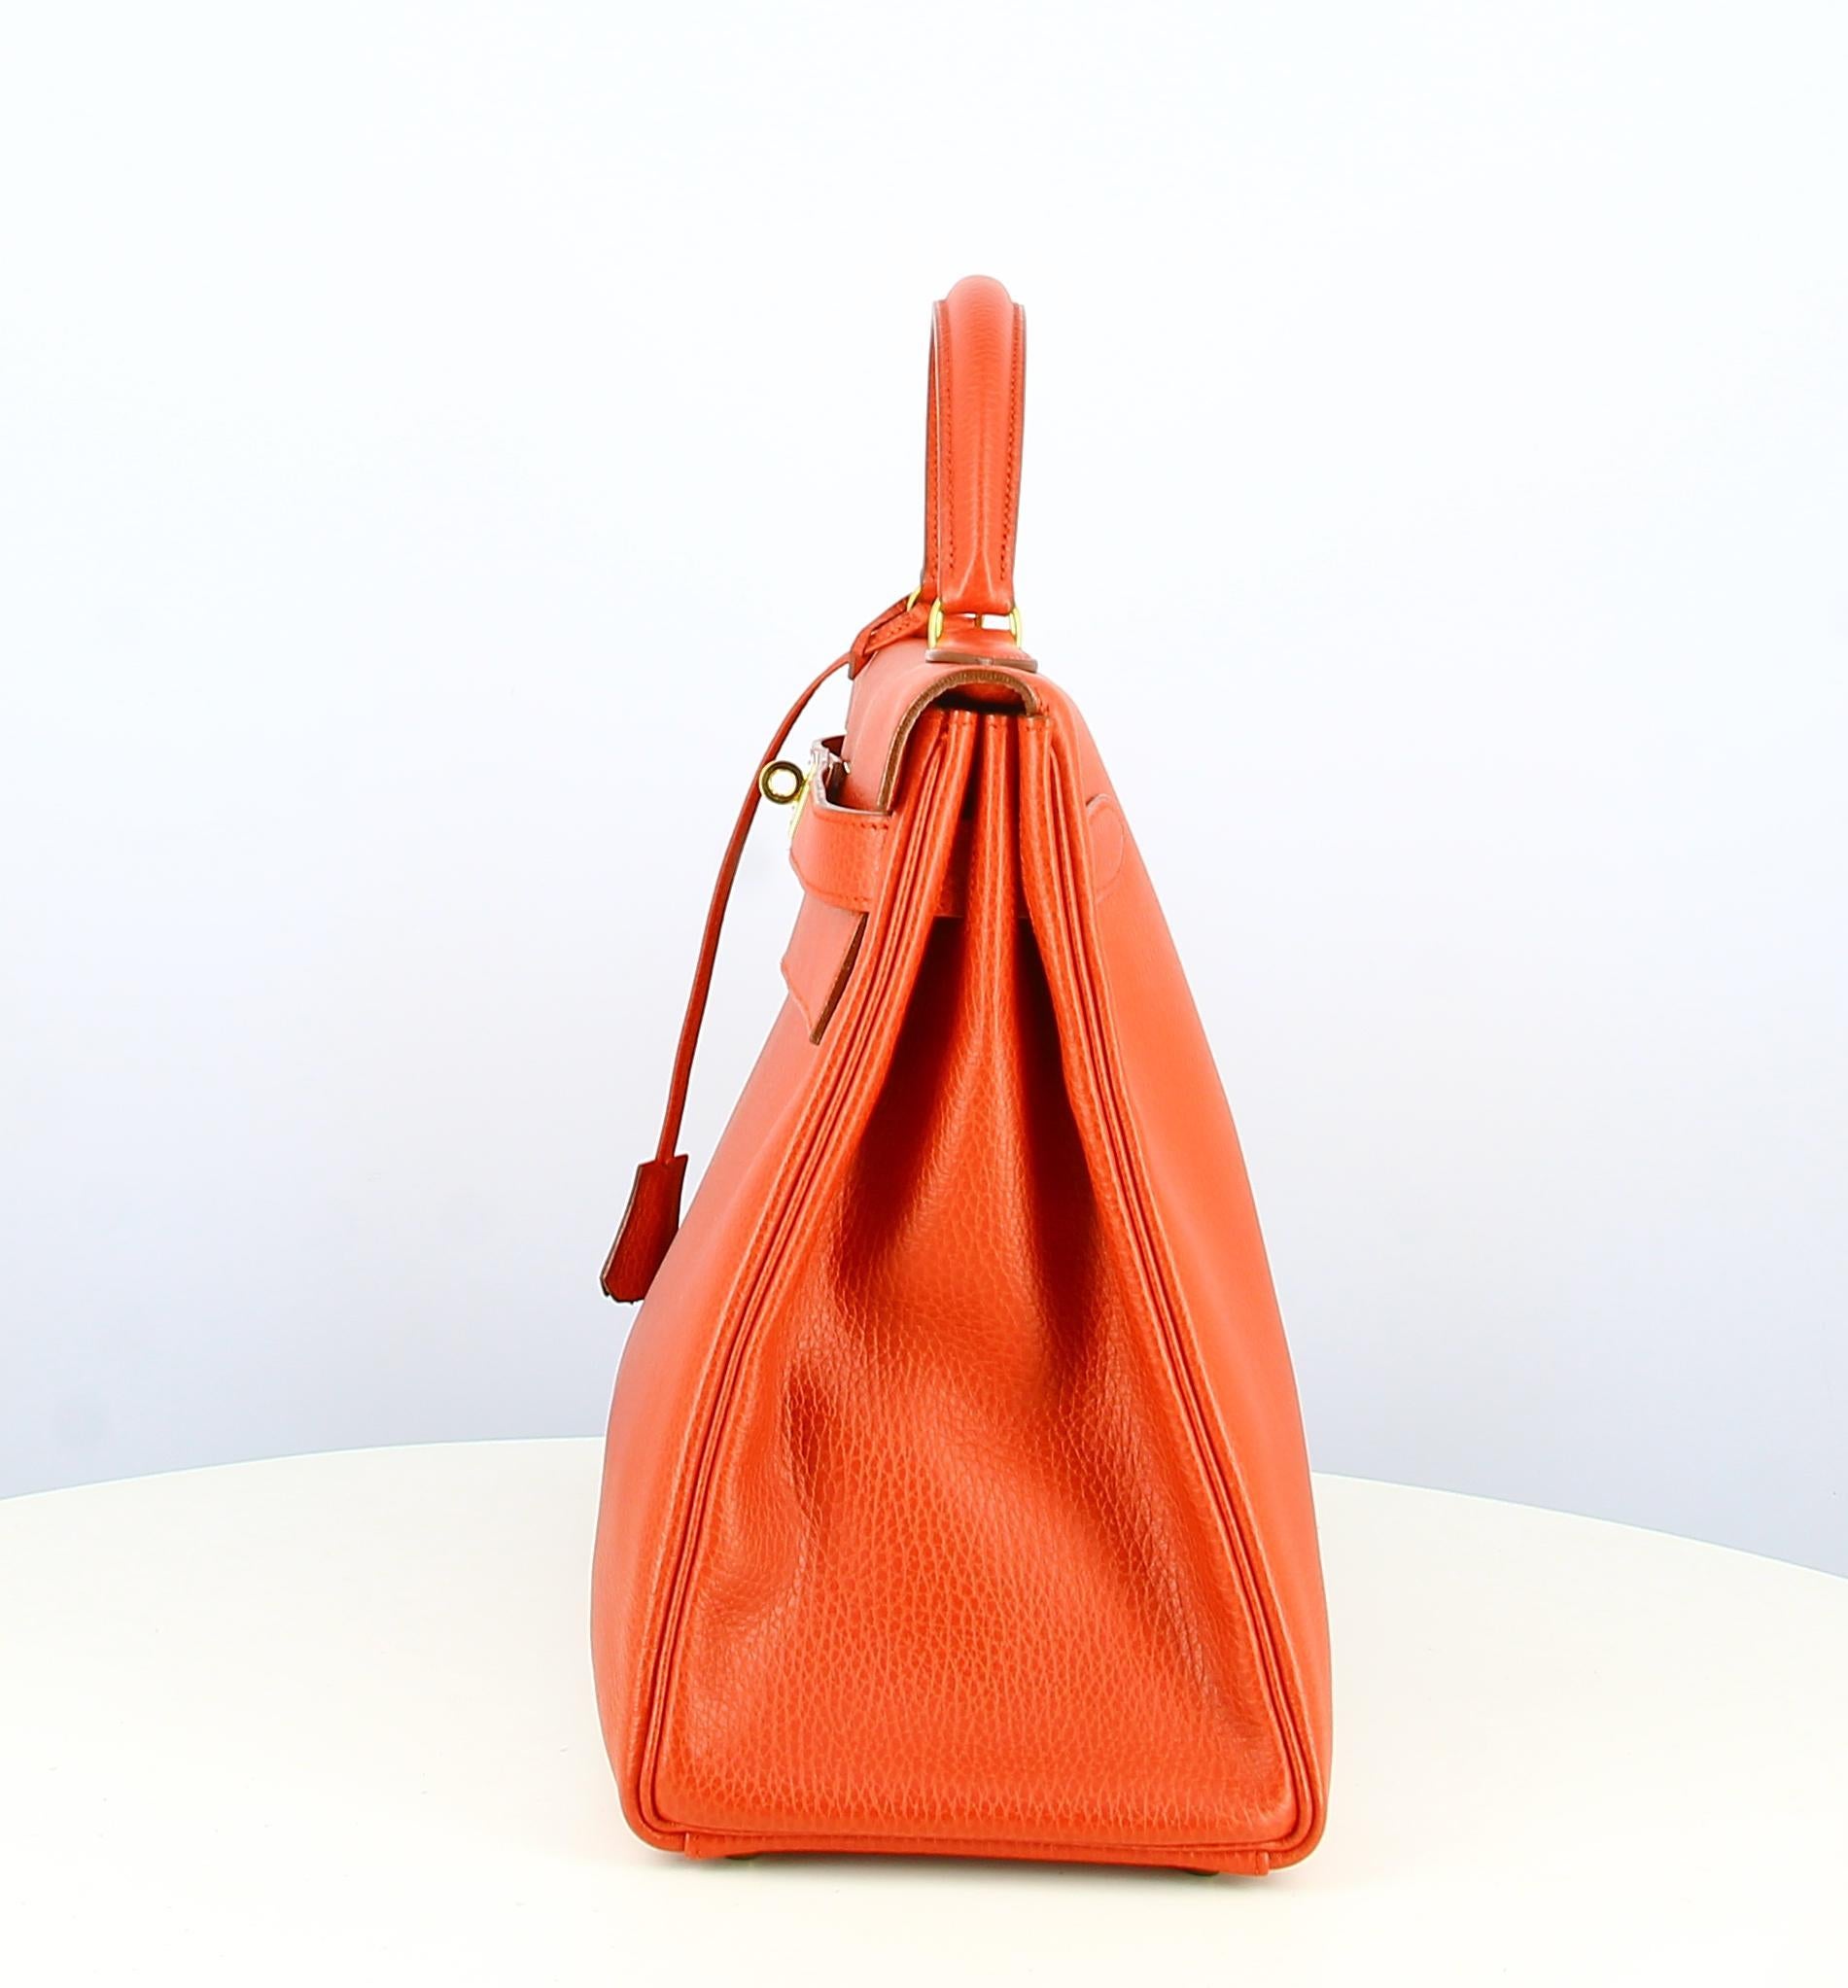 1992 Hermès Kelly 40 Handbag In Red Ardennes Leather
- Very good condition. Slight traces of wear over time.
- Hermès Kelly Bag 
- Courchevel leather. Small hanses. 
- Clasp: Golden
- Interior: Smooth red leather. Large golden zipped inside pocket.